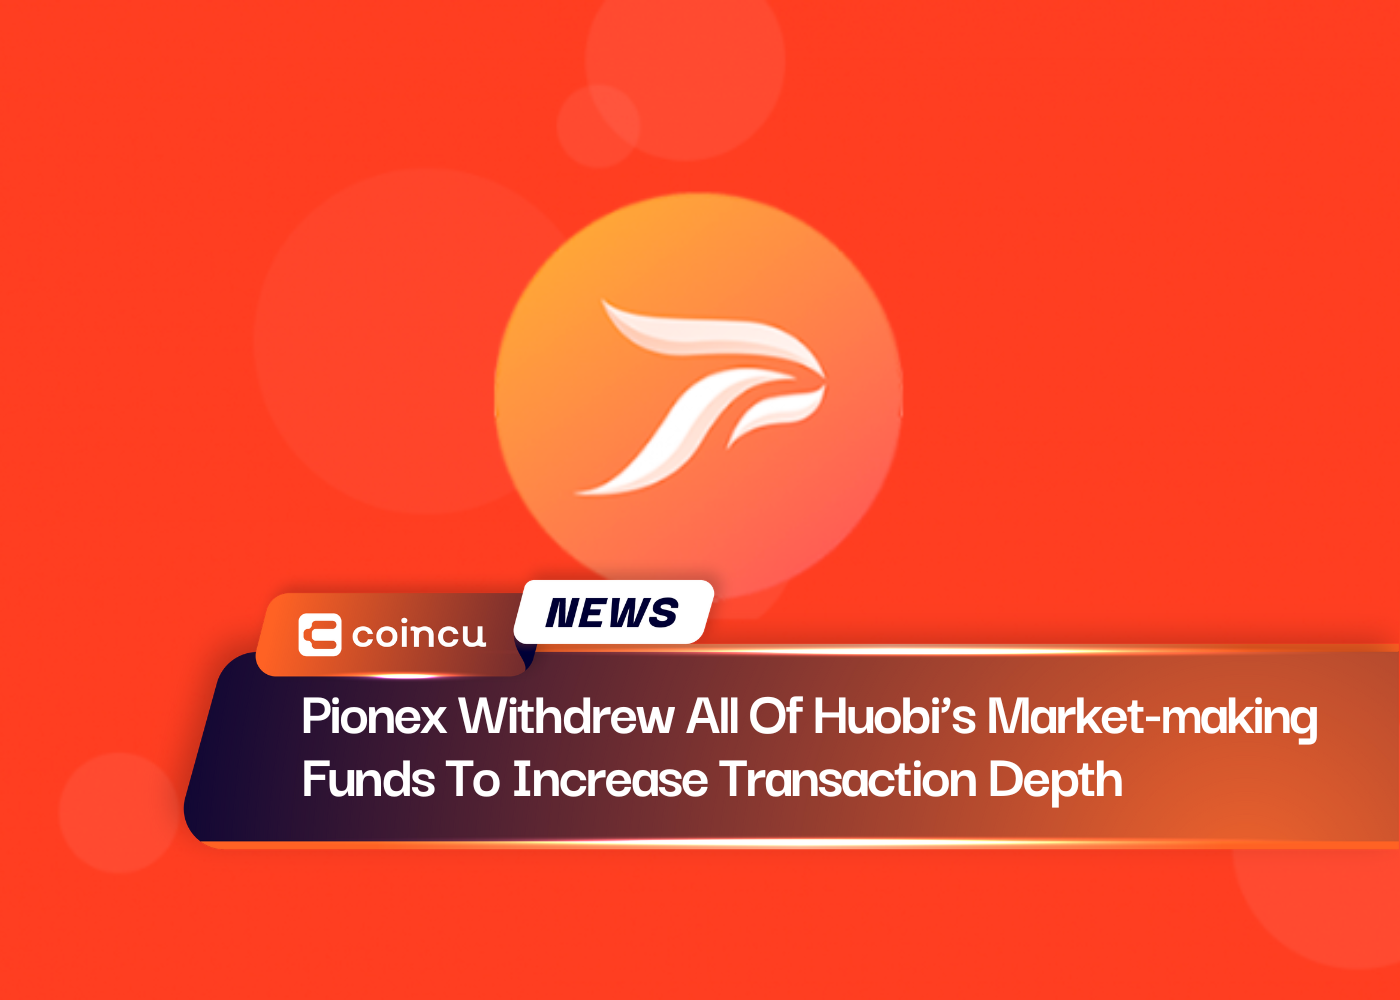 Pionex Withdrew All Of Huobi’s Market-making Funds To Increase Transaction Depth